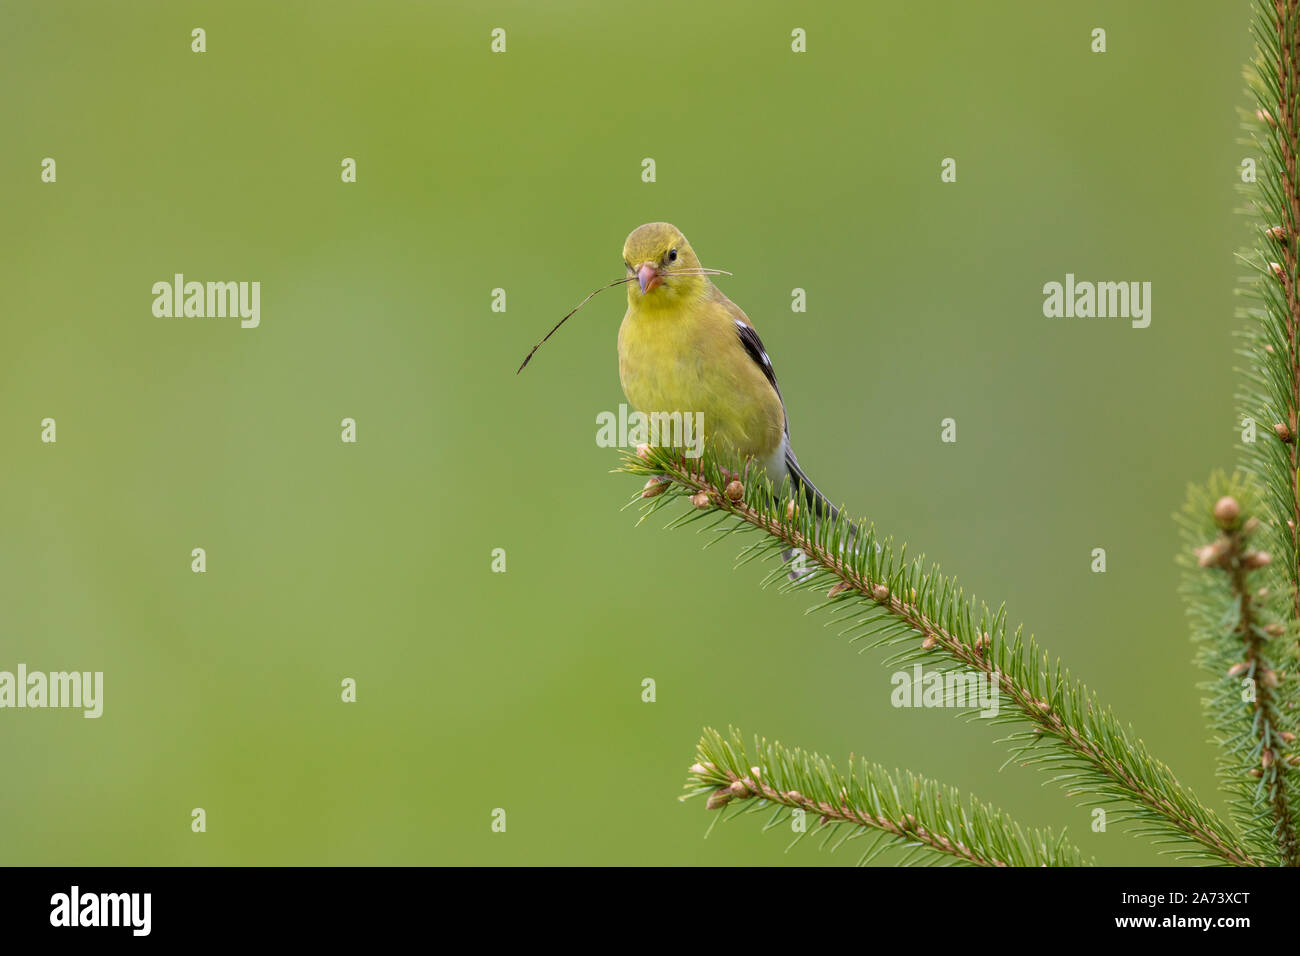 Female American goldfinch holding a pine needle in her beak. Stock Photo